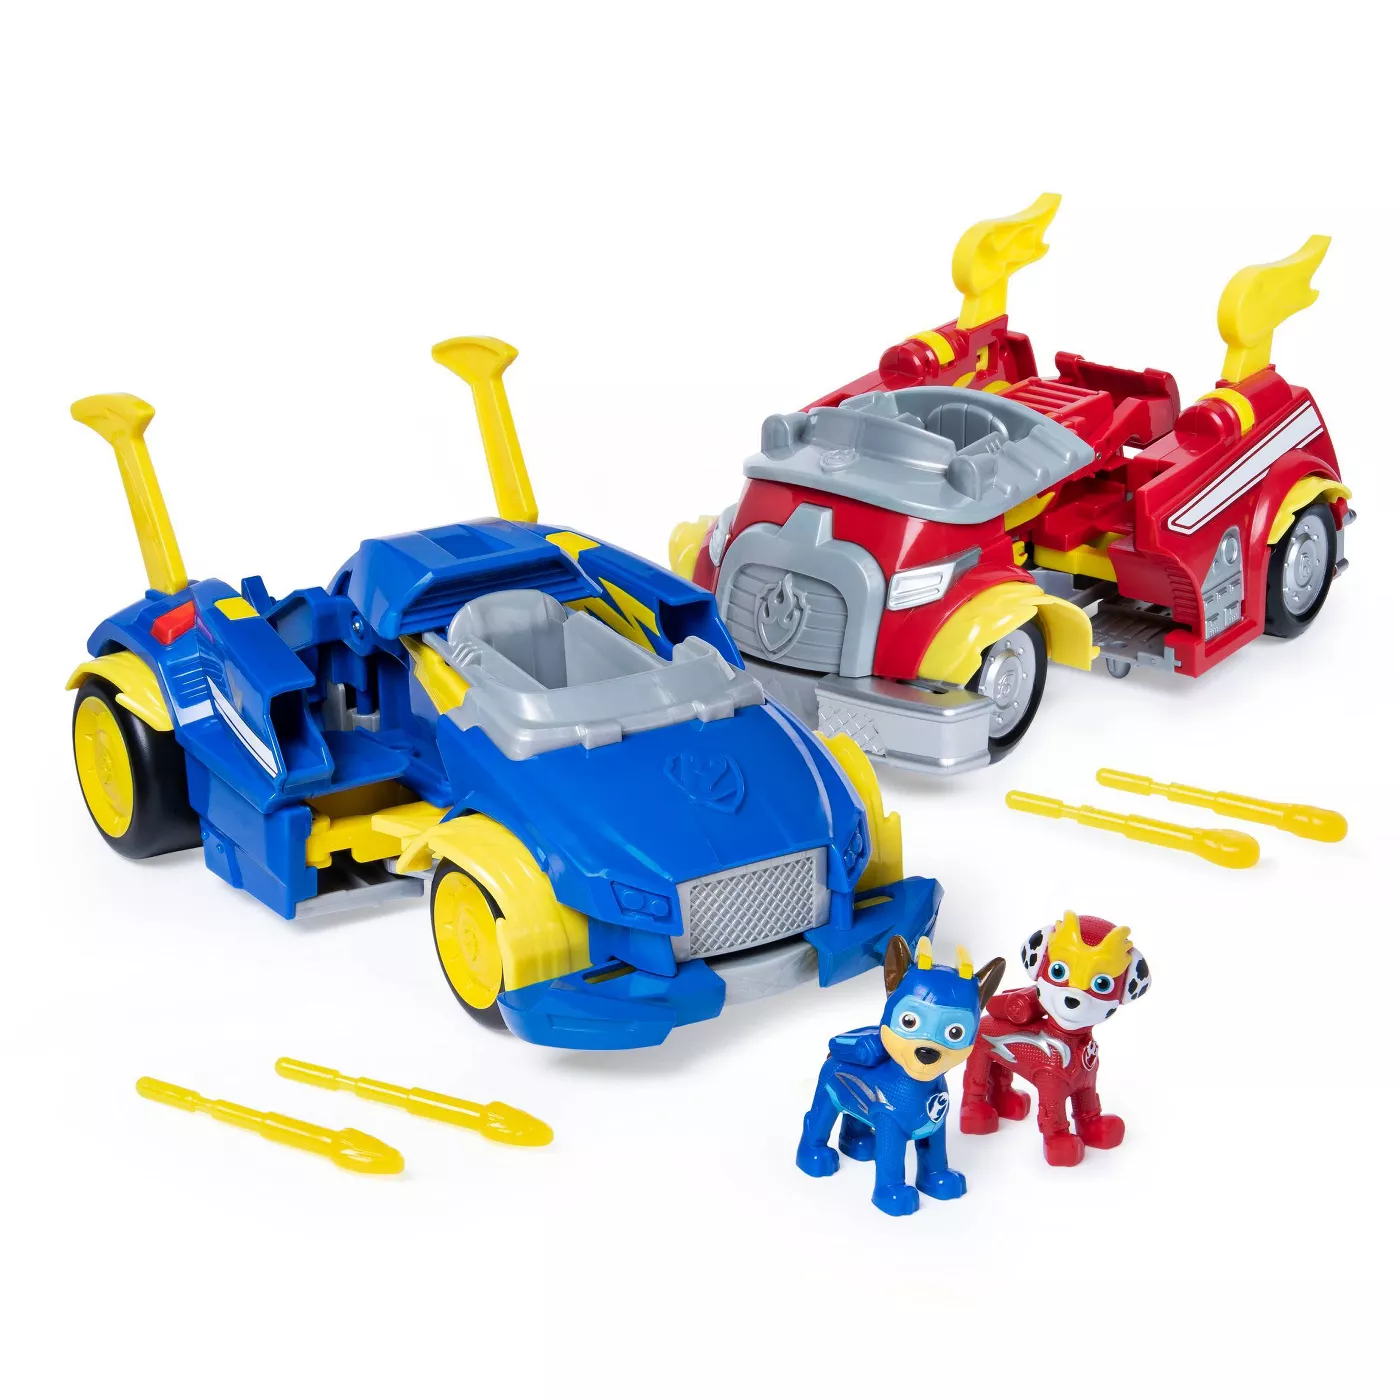 PAW Patrol Marshall and Chase Powered up Vehicles Dual Pack - image 1 of 6